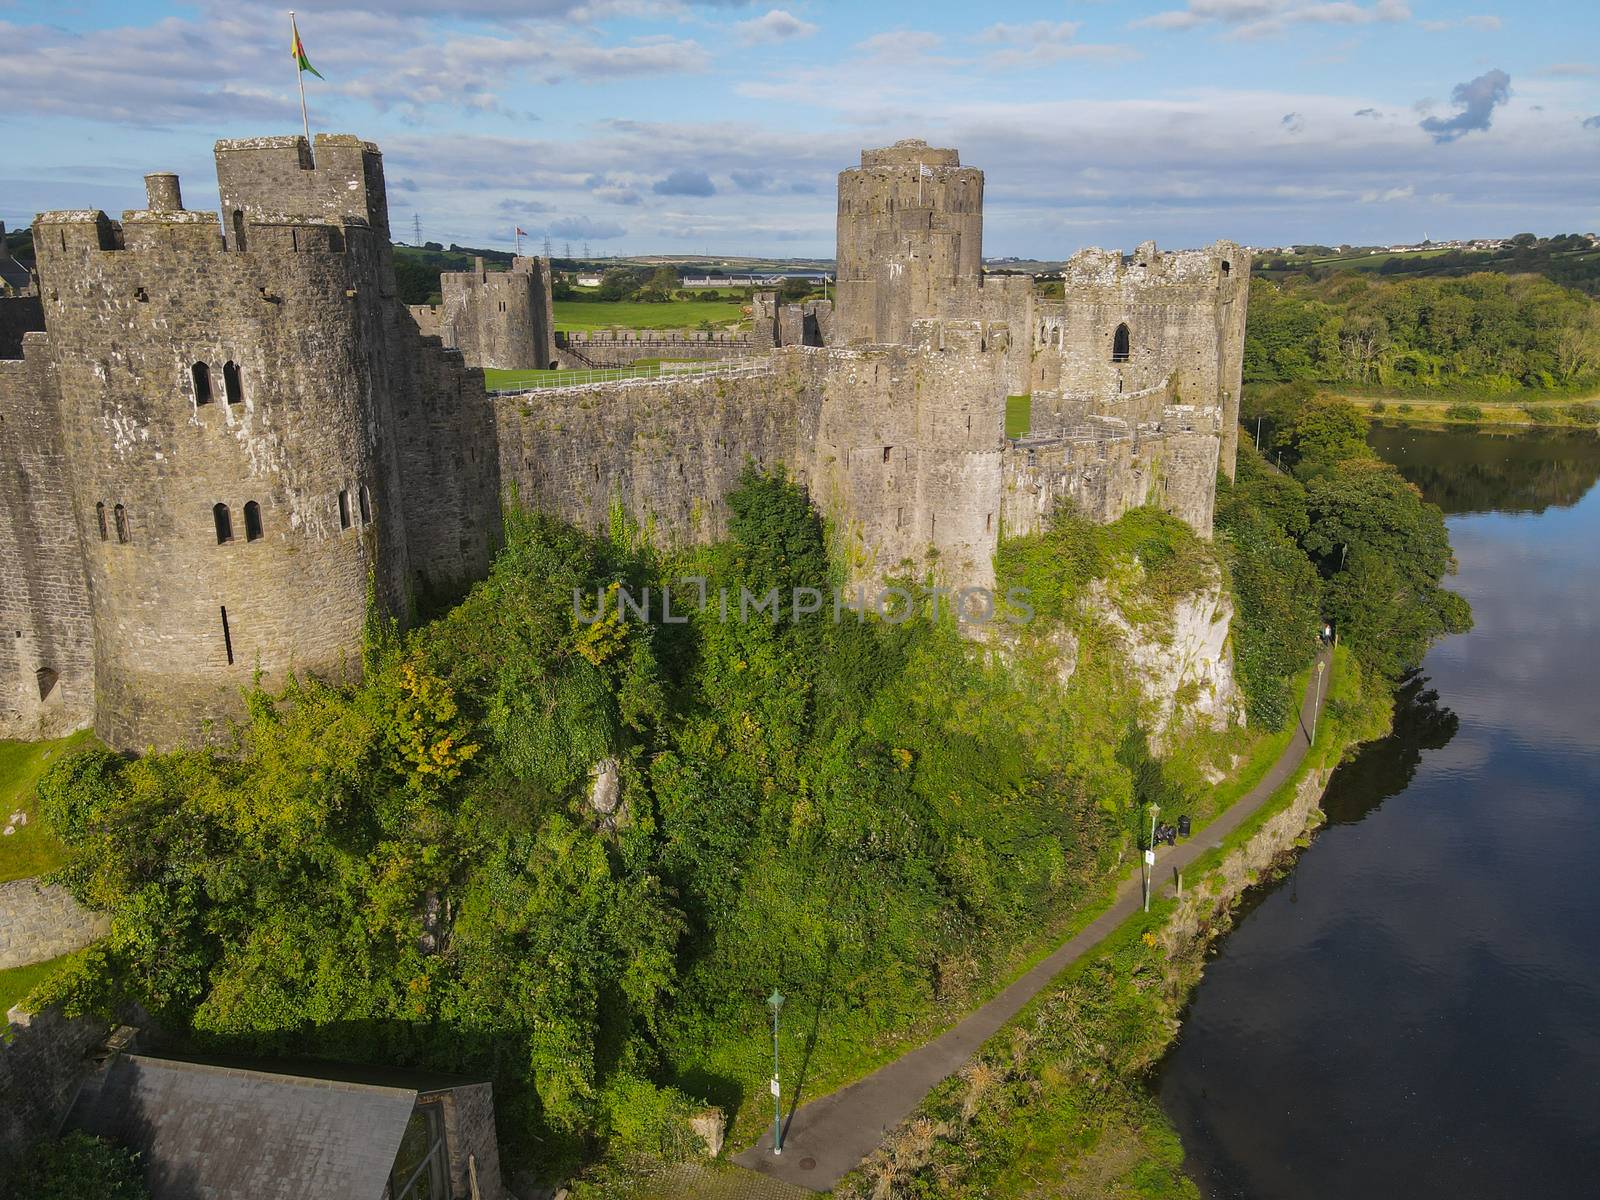 The medieval Pembroke Castle Wales surrounded by a moat and overlooked the market town of Pembroke. This fortress is an historical building and the start of the Tudor Dynasty. Ariel View